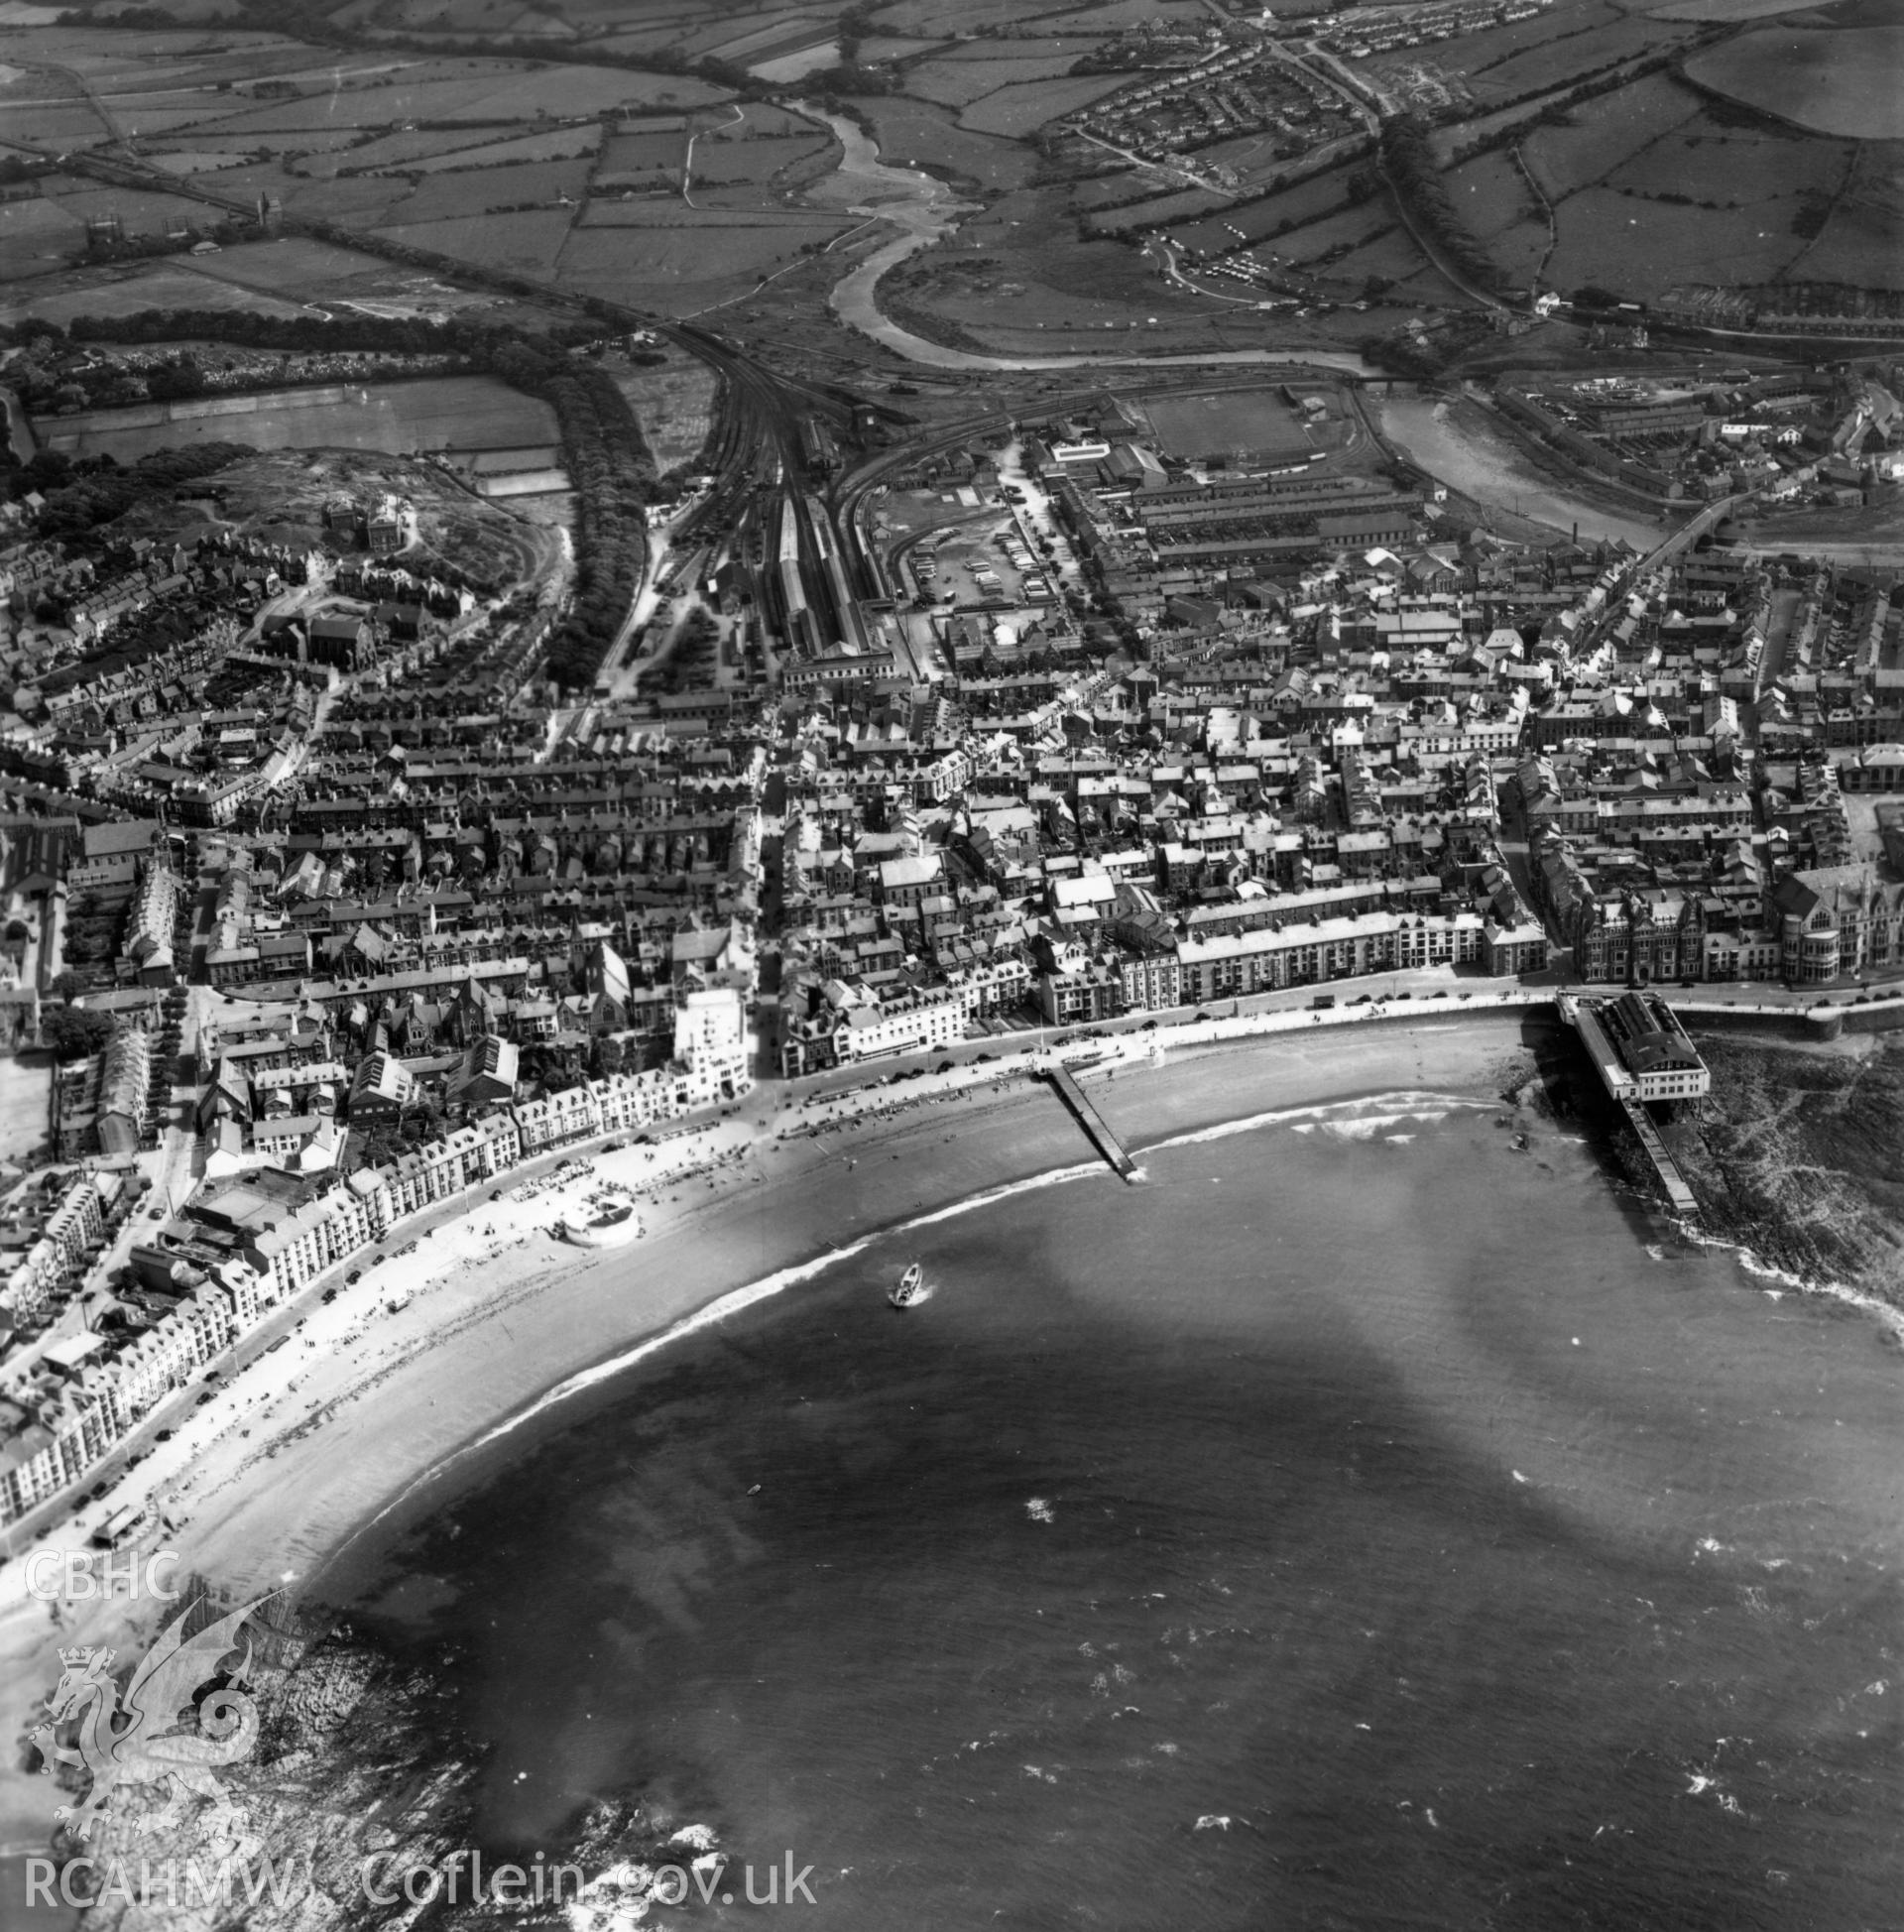 General view of Aberystwyth from the seafront looking south east. Oblique aerial photograph, 5?" cut roll film.